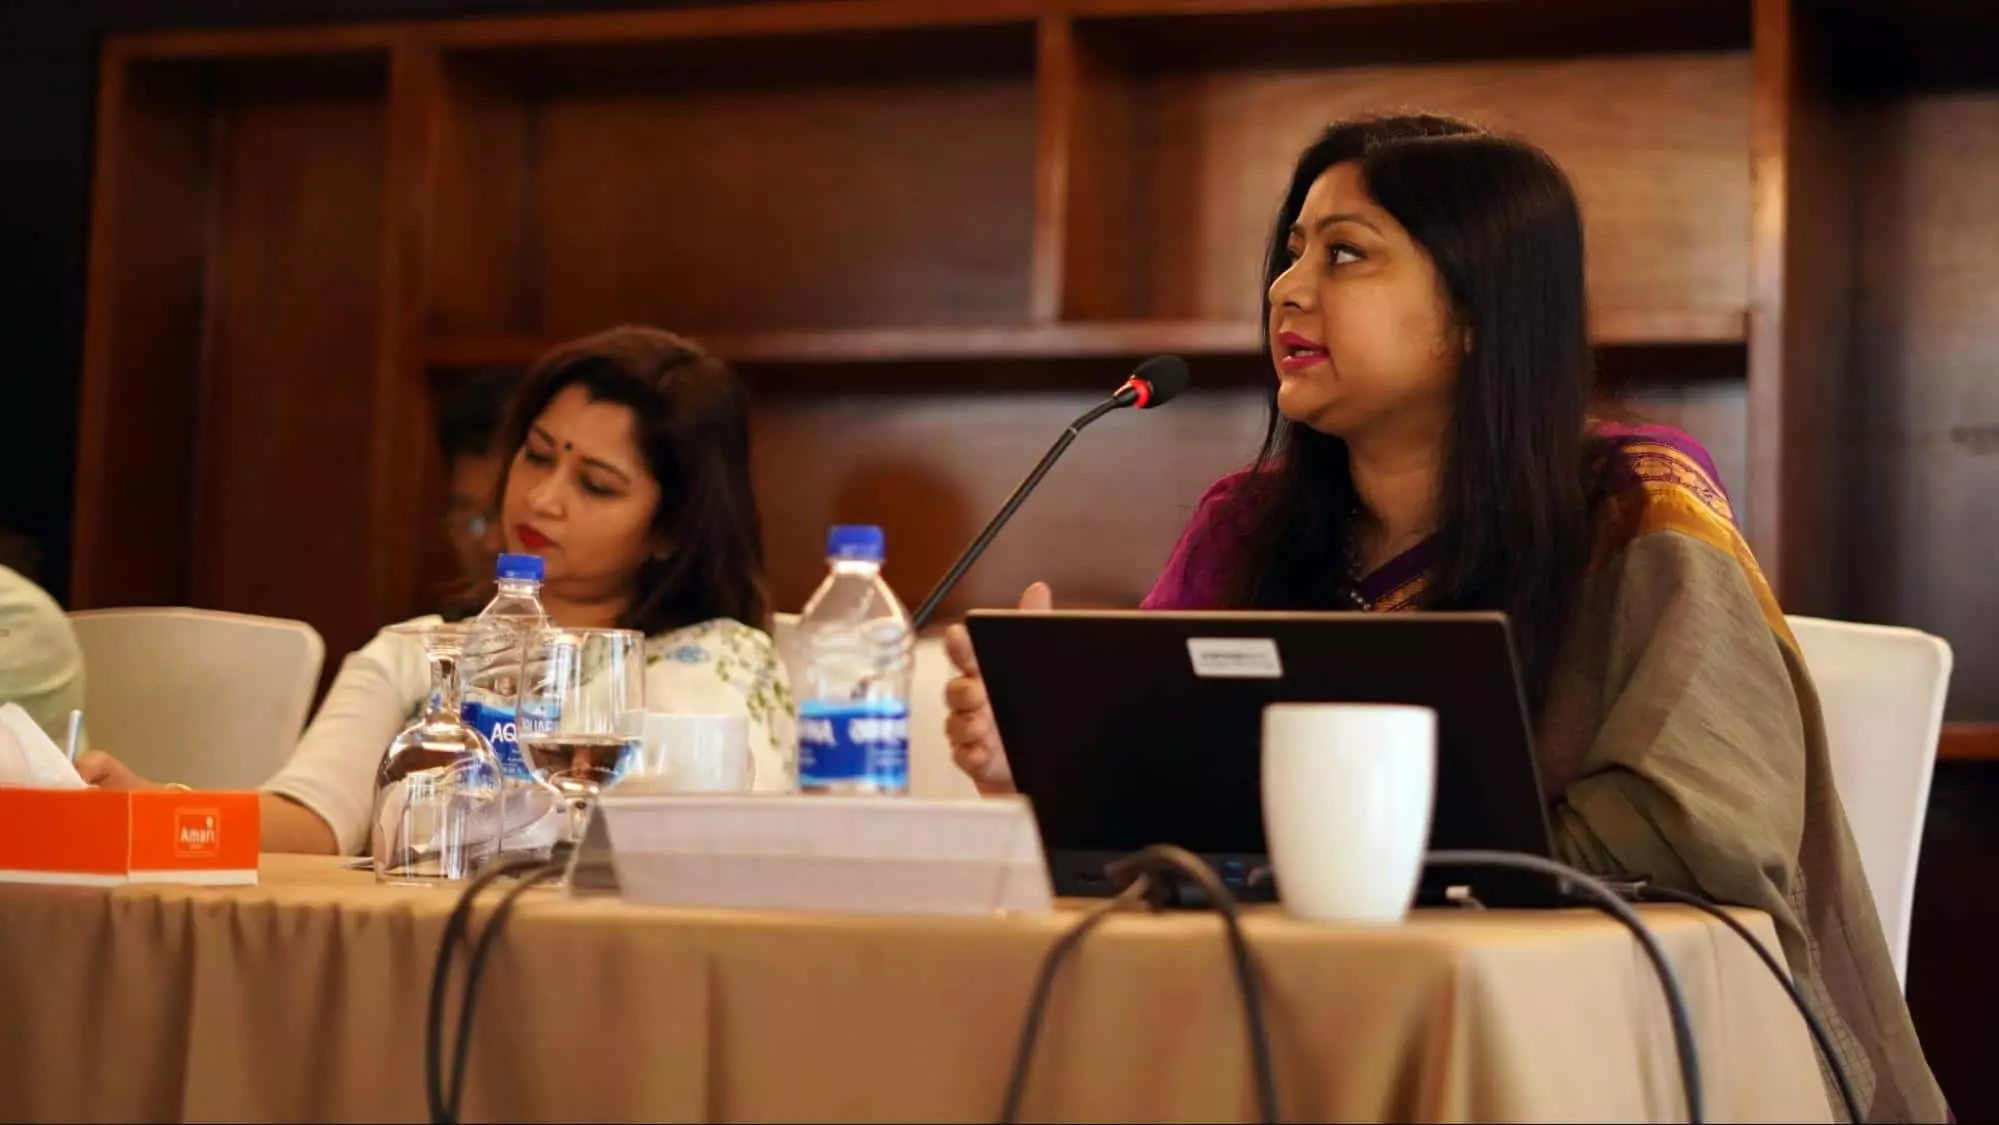 Ms. Lopa Rahman, ESG officer, IFC elaborates on the way forward extracted from the discussion